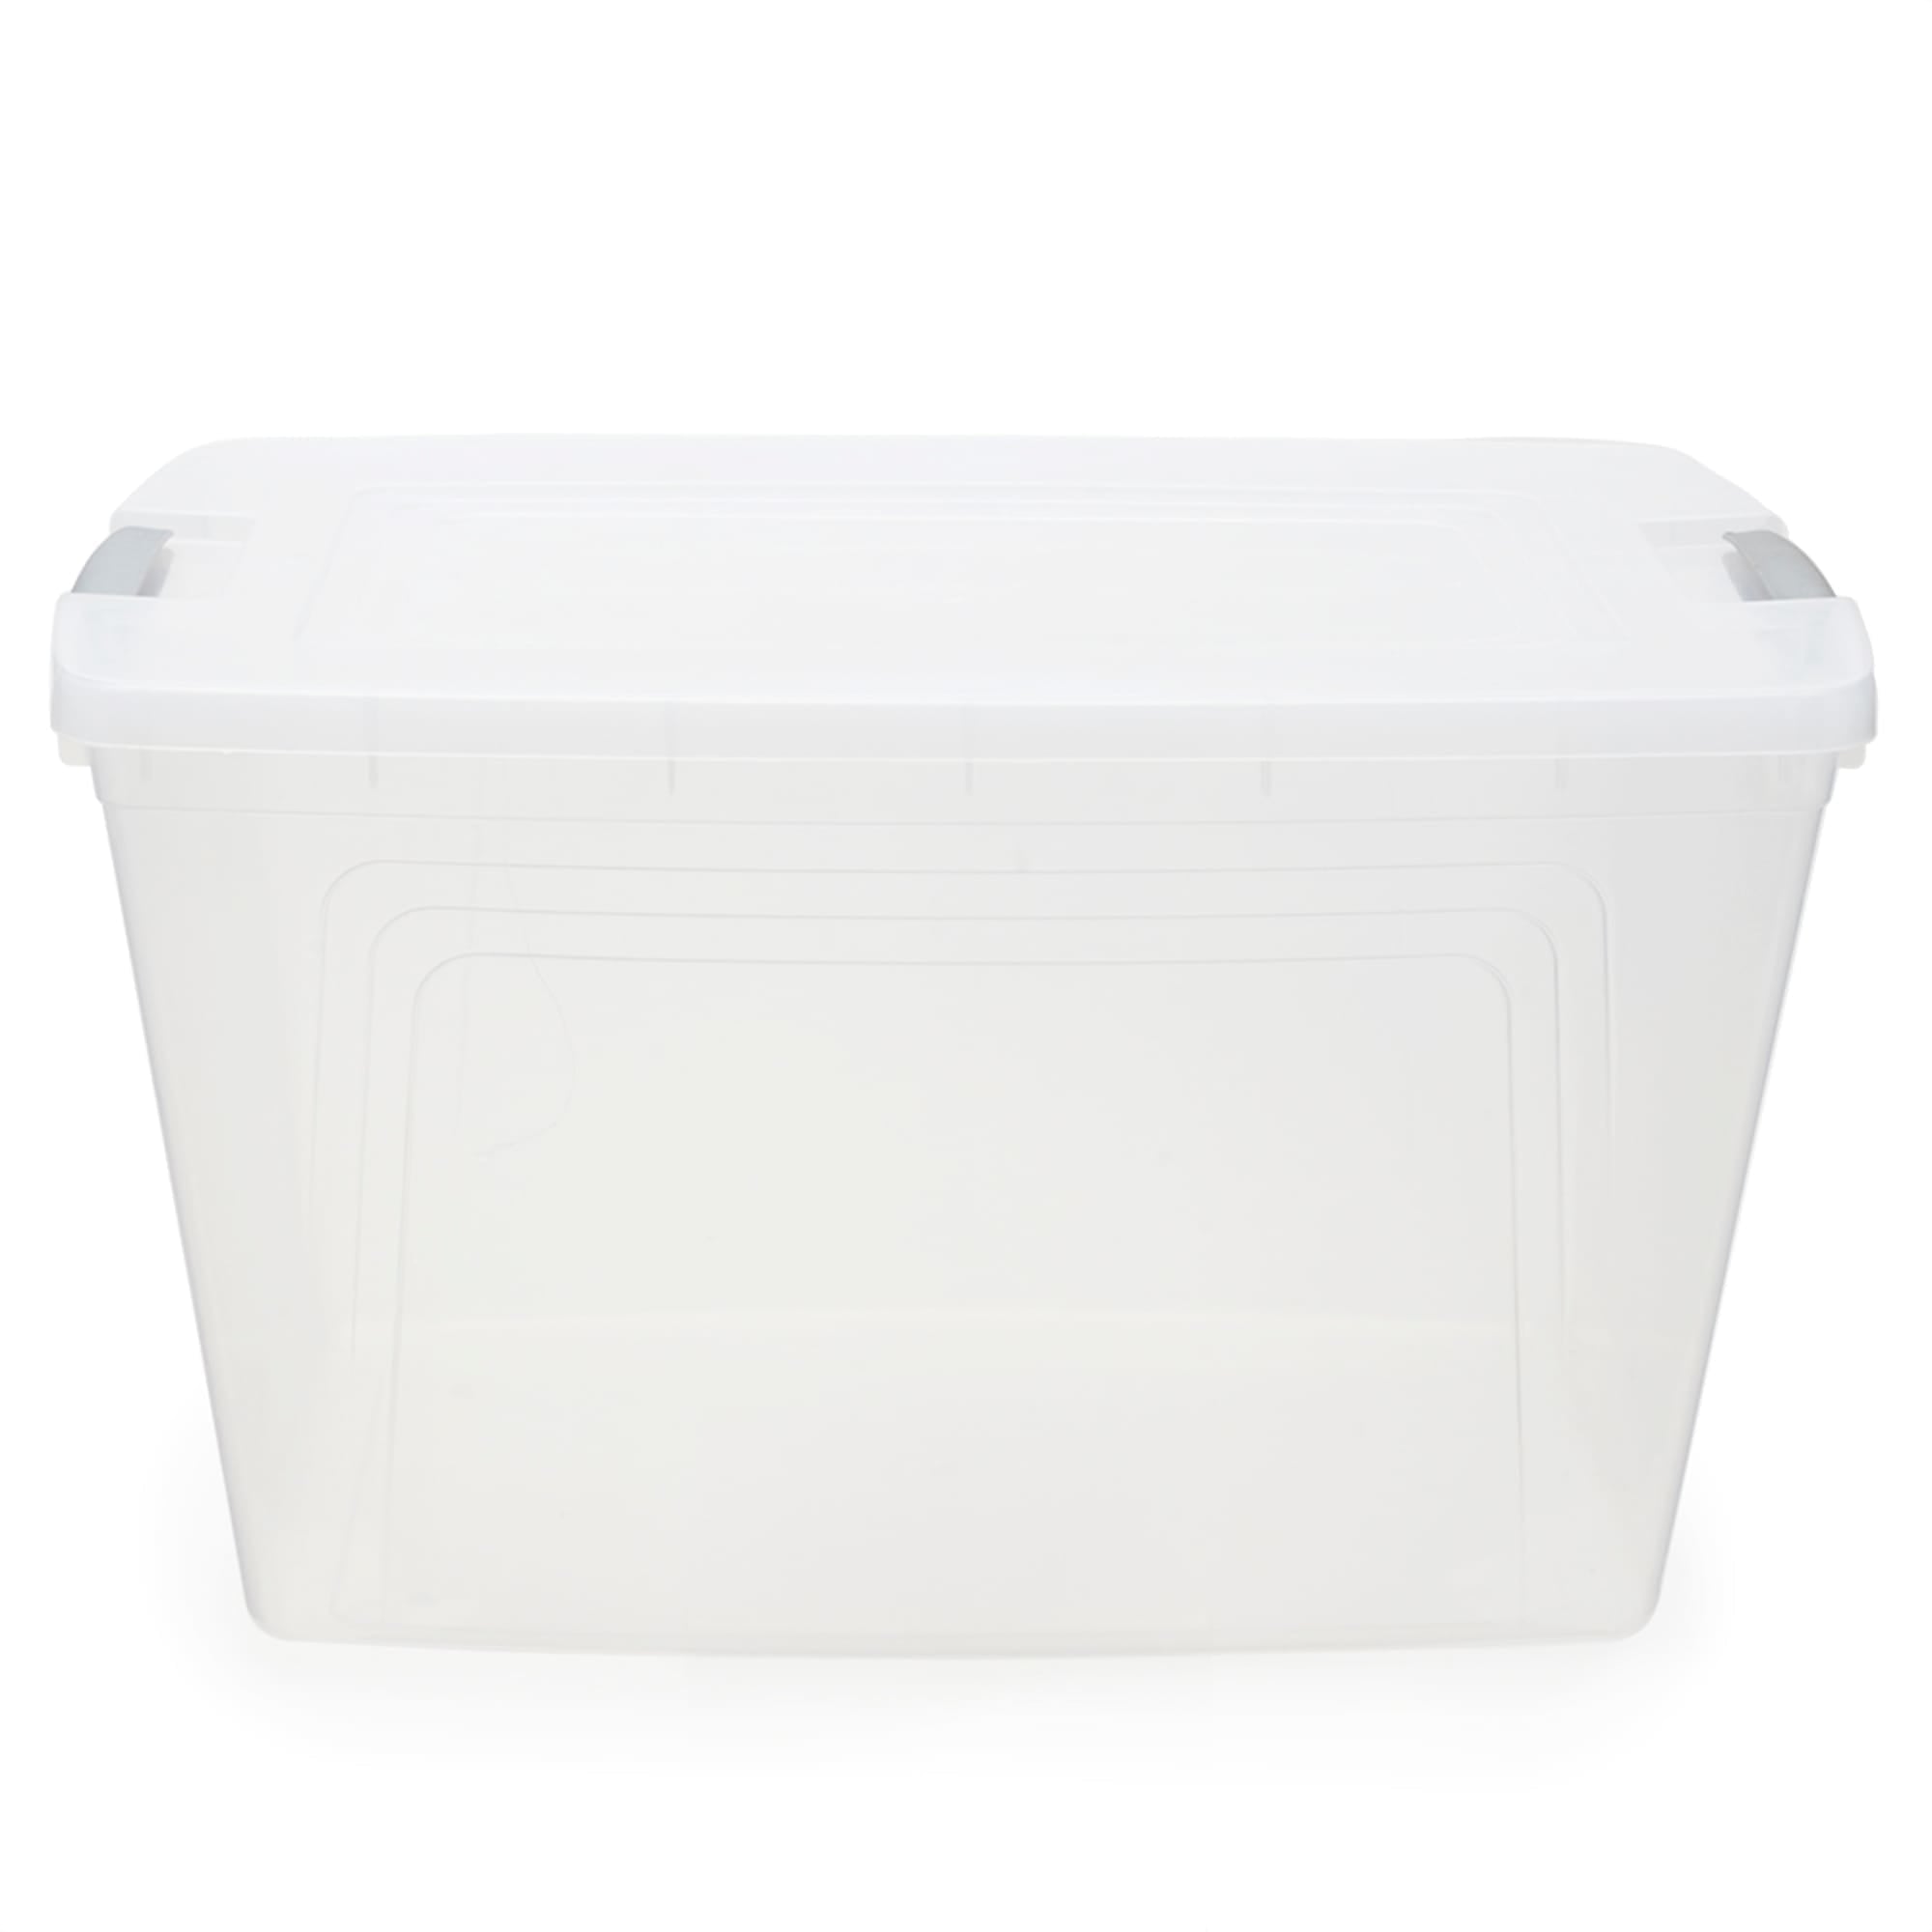 Home Basics 60 Liter Plastic Storage Container with lid, Clear $15.00 EACH, CASE PACK OF 6